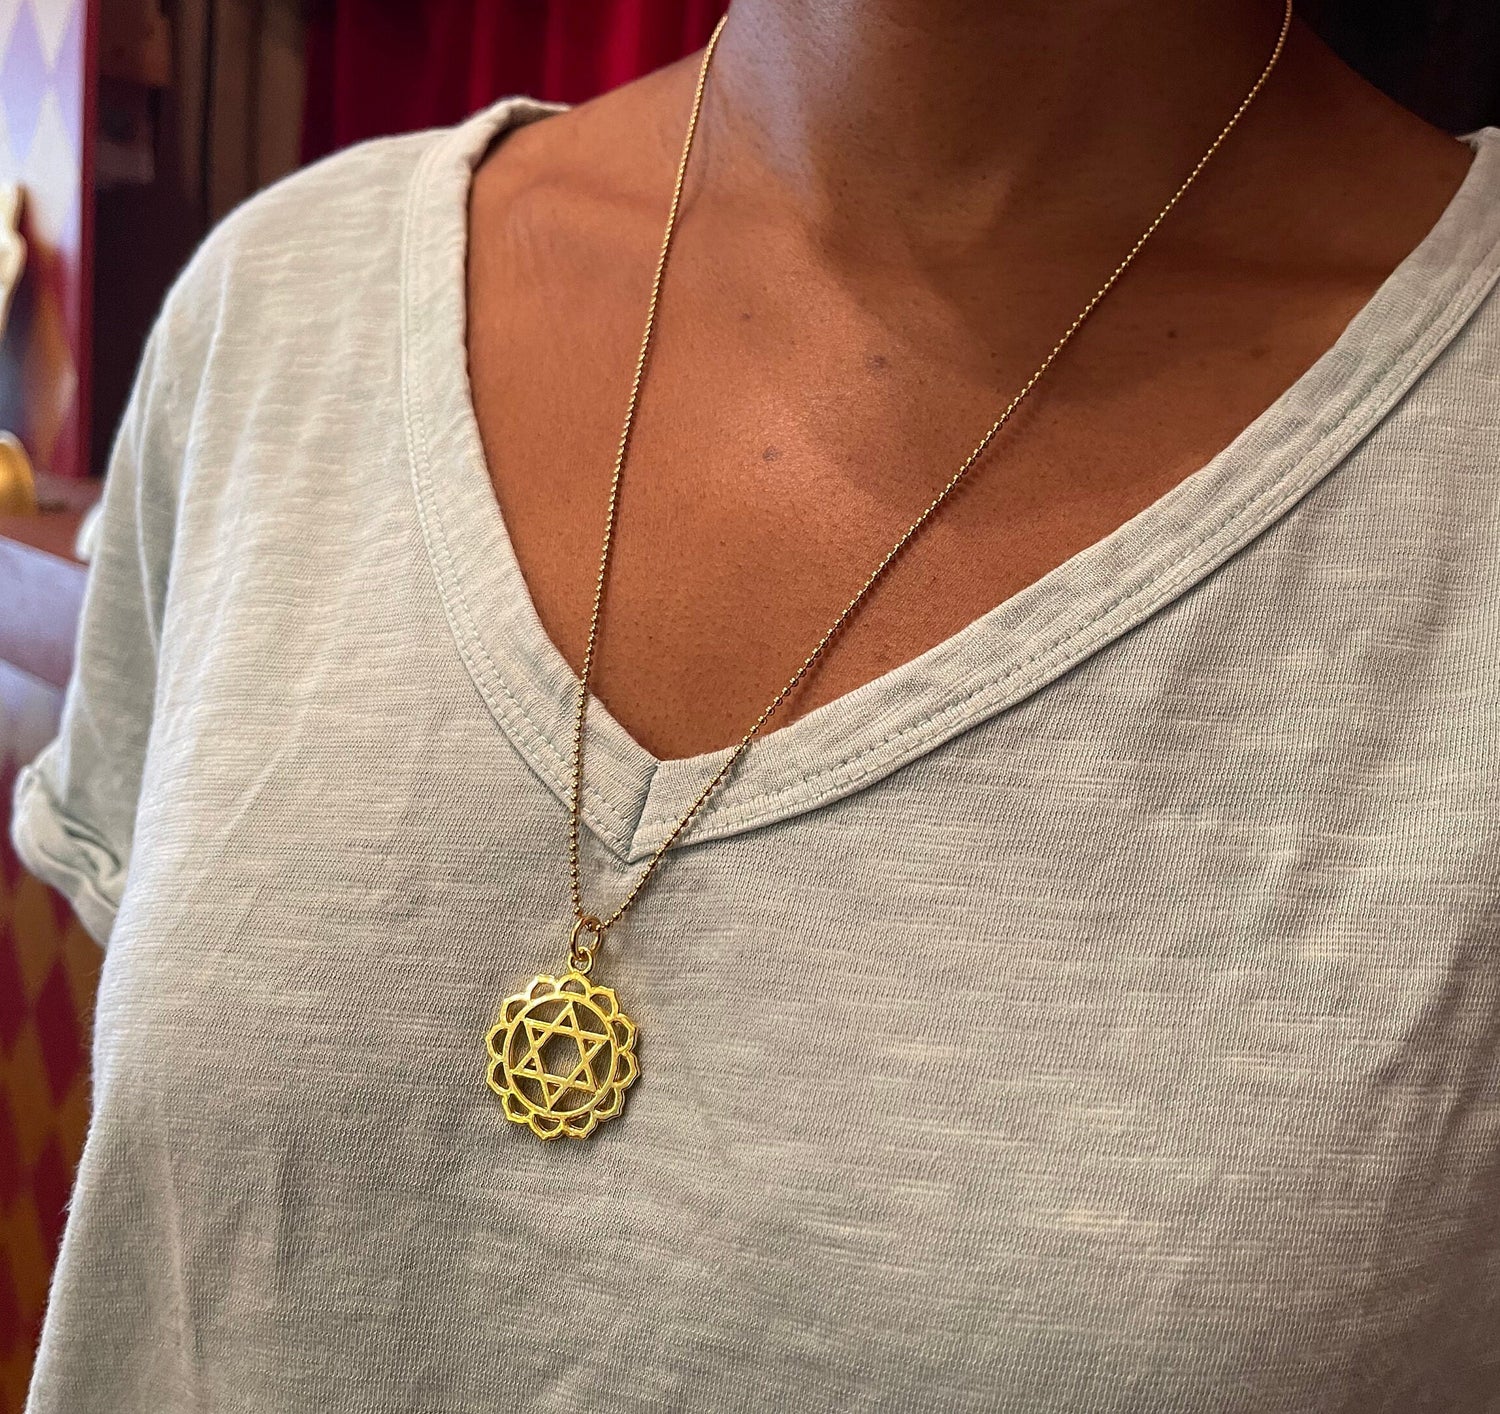 Chakra Charm, Pendant, Set, Ball Chain Necklace – gold-plated, silver-plated – crown, third eye, throat, heart, solar plexus, sacrum, root